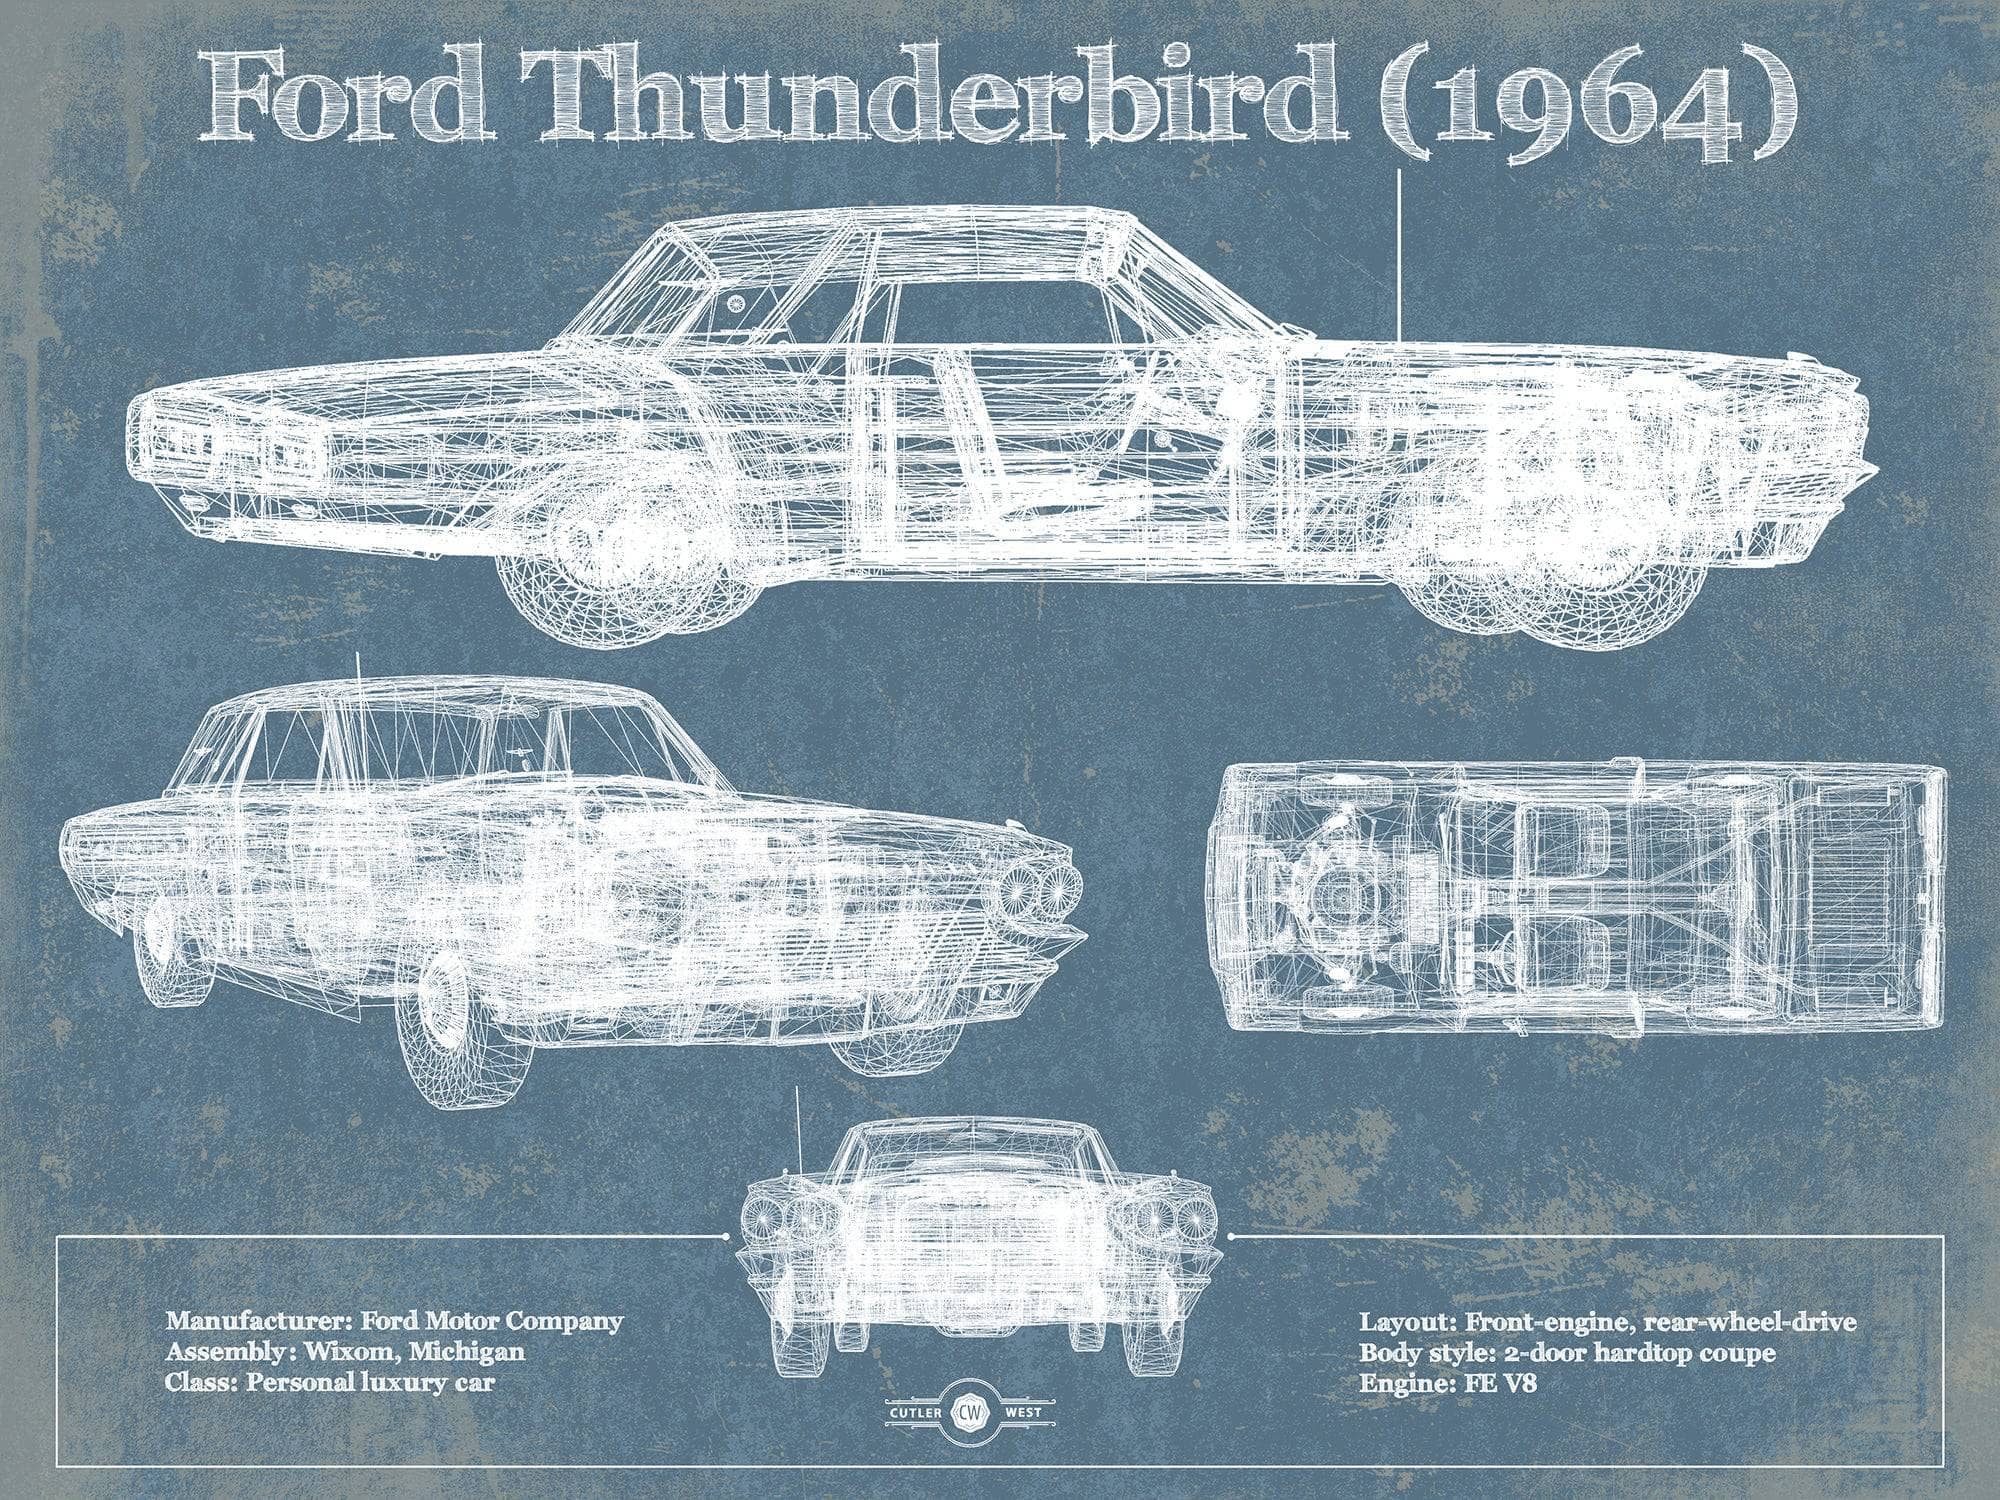 Cutler West Ford Collection 14" x 11" / Unframed Ford Thunderbird (1964) Vintage Blueprint Auto Print 892171567_18328